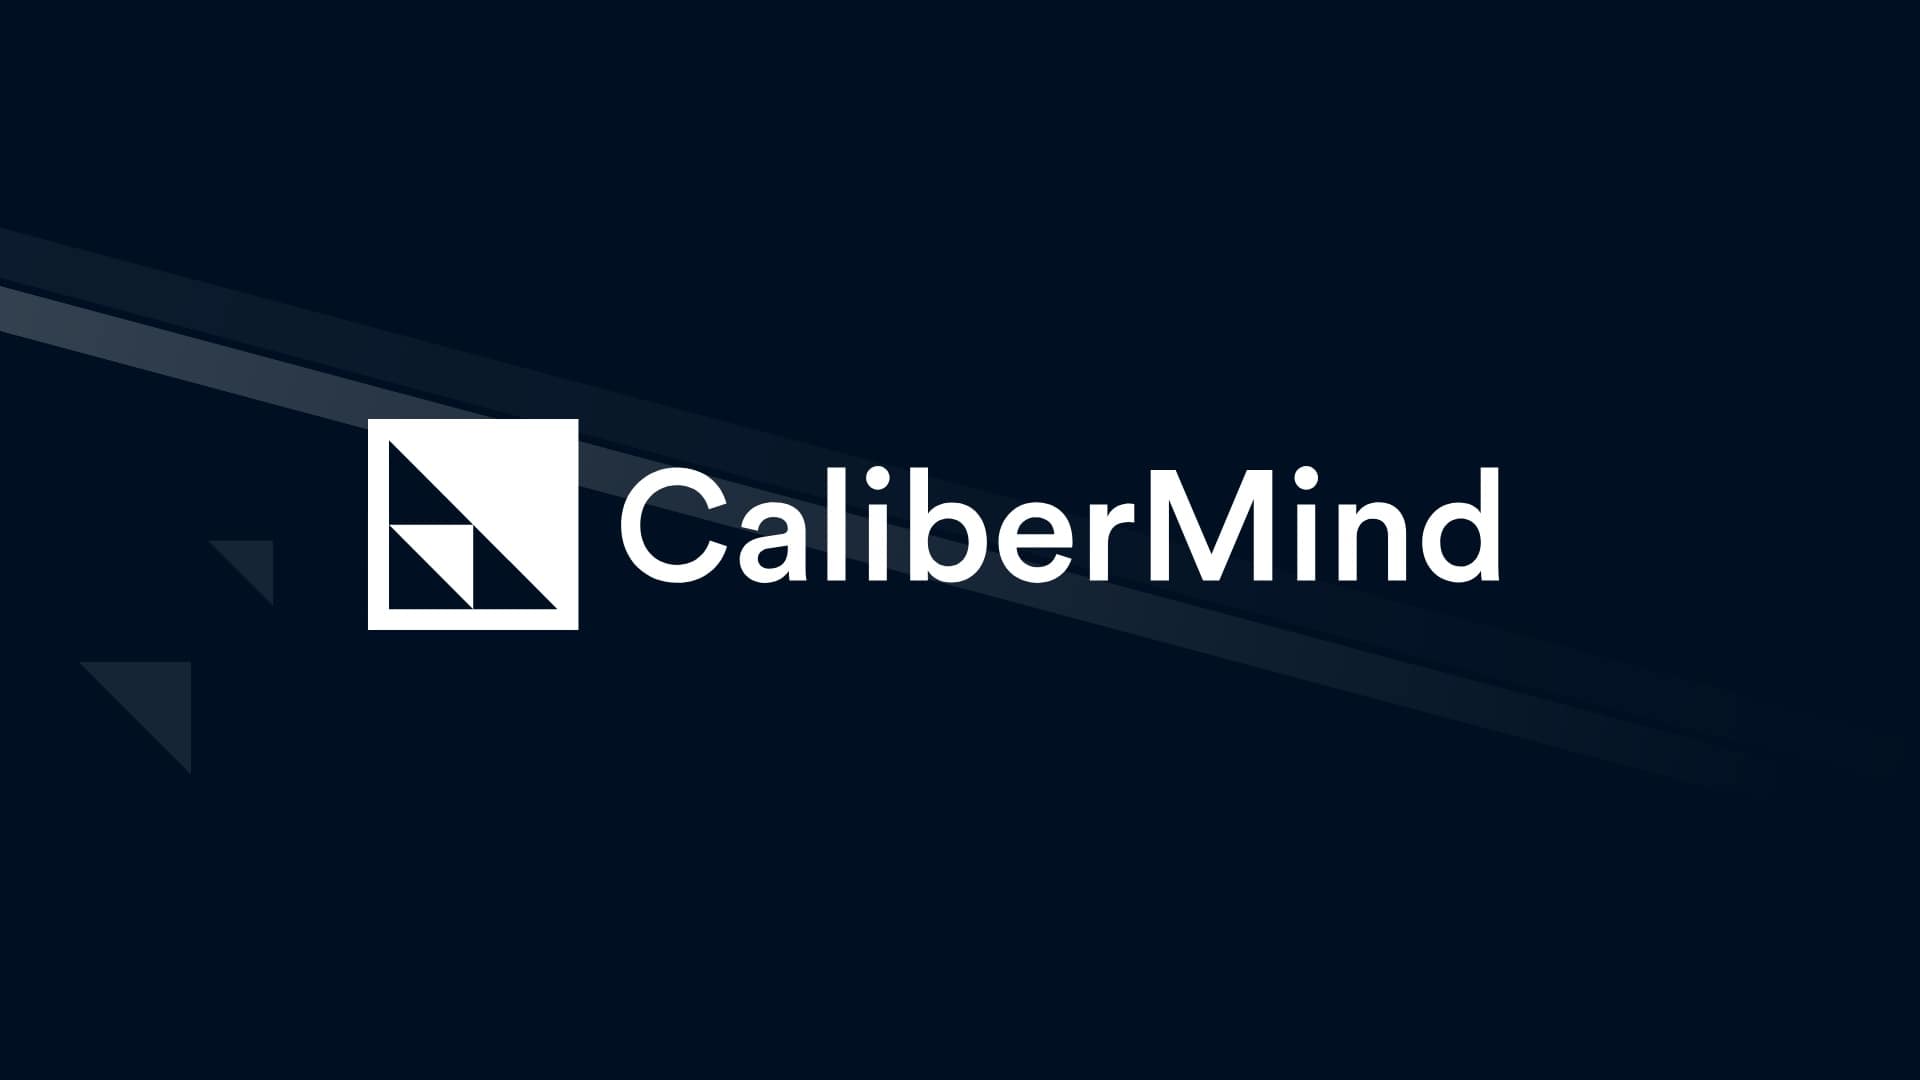 See CaliberMind in Action